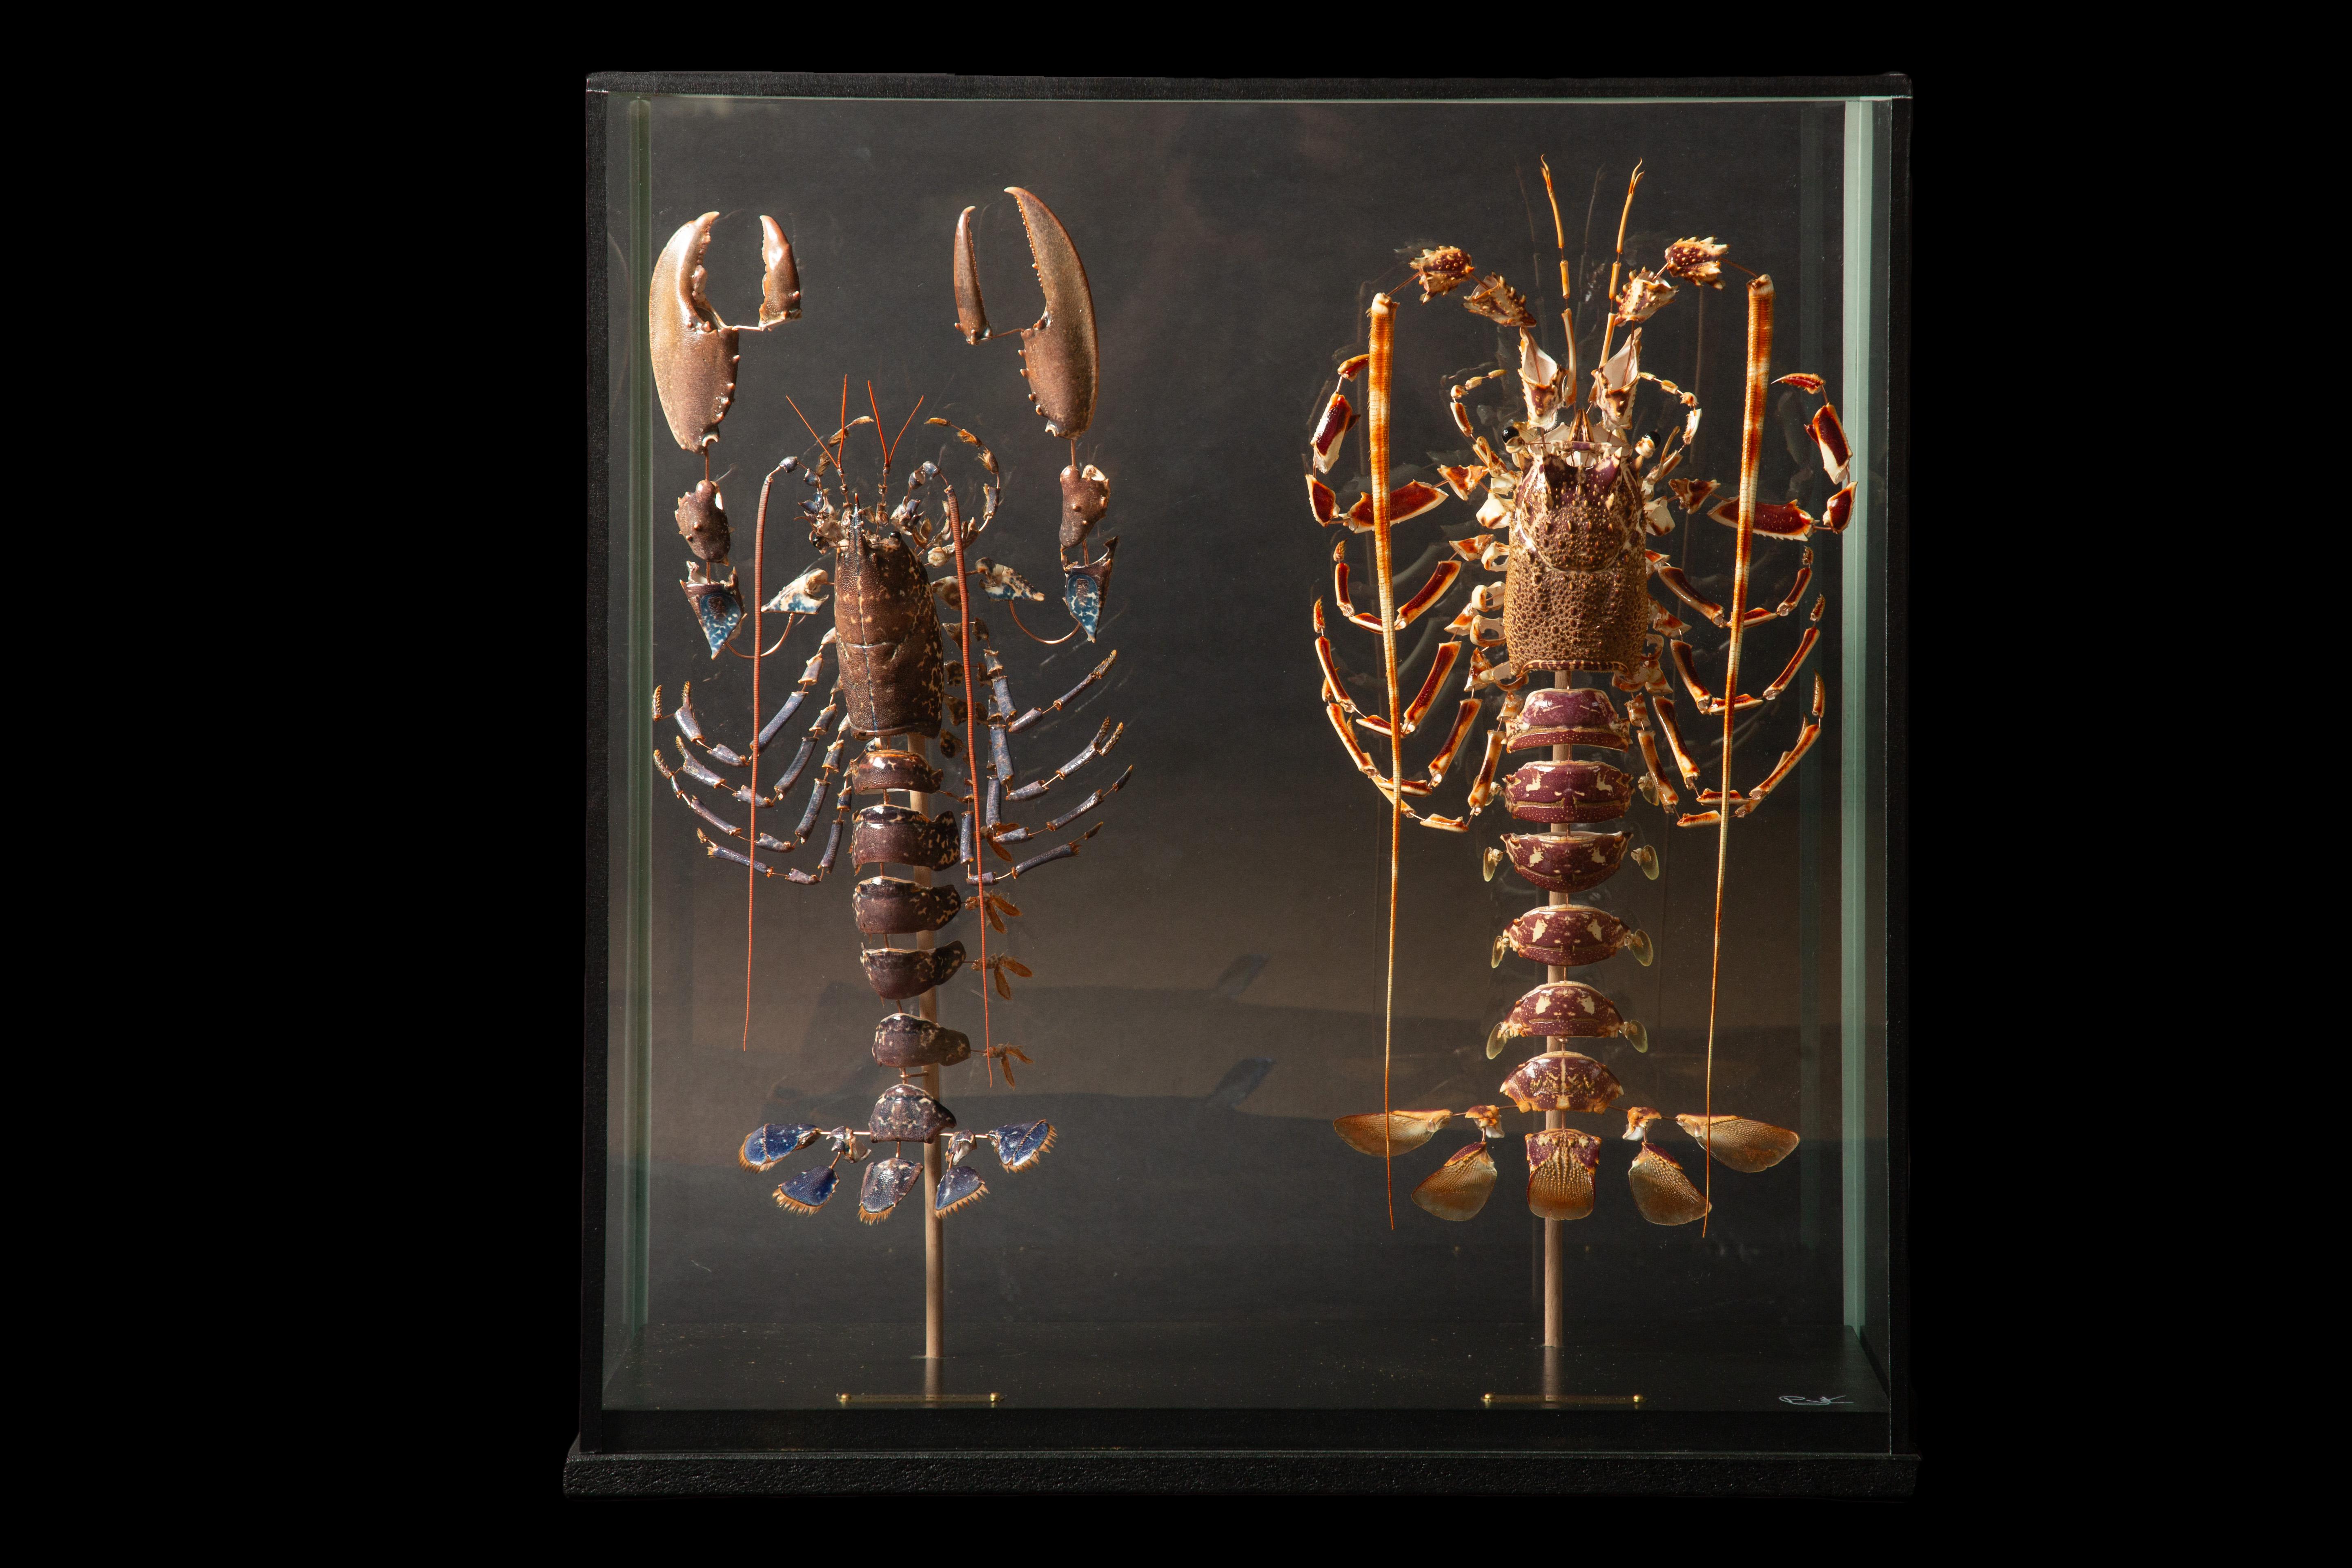 Deconstructed Lobster Pair (Homeras Gammarus) (Palinurus Elephas) Under a Custom Glass Case

Homarus gammarus, known as the European lobster or common lobster, is a species of clawed lobster from the eastern Atlantic Ocean, Mediterranean Sea and